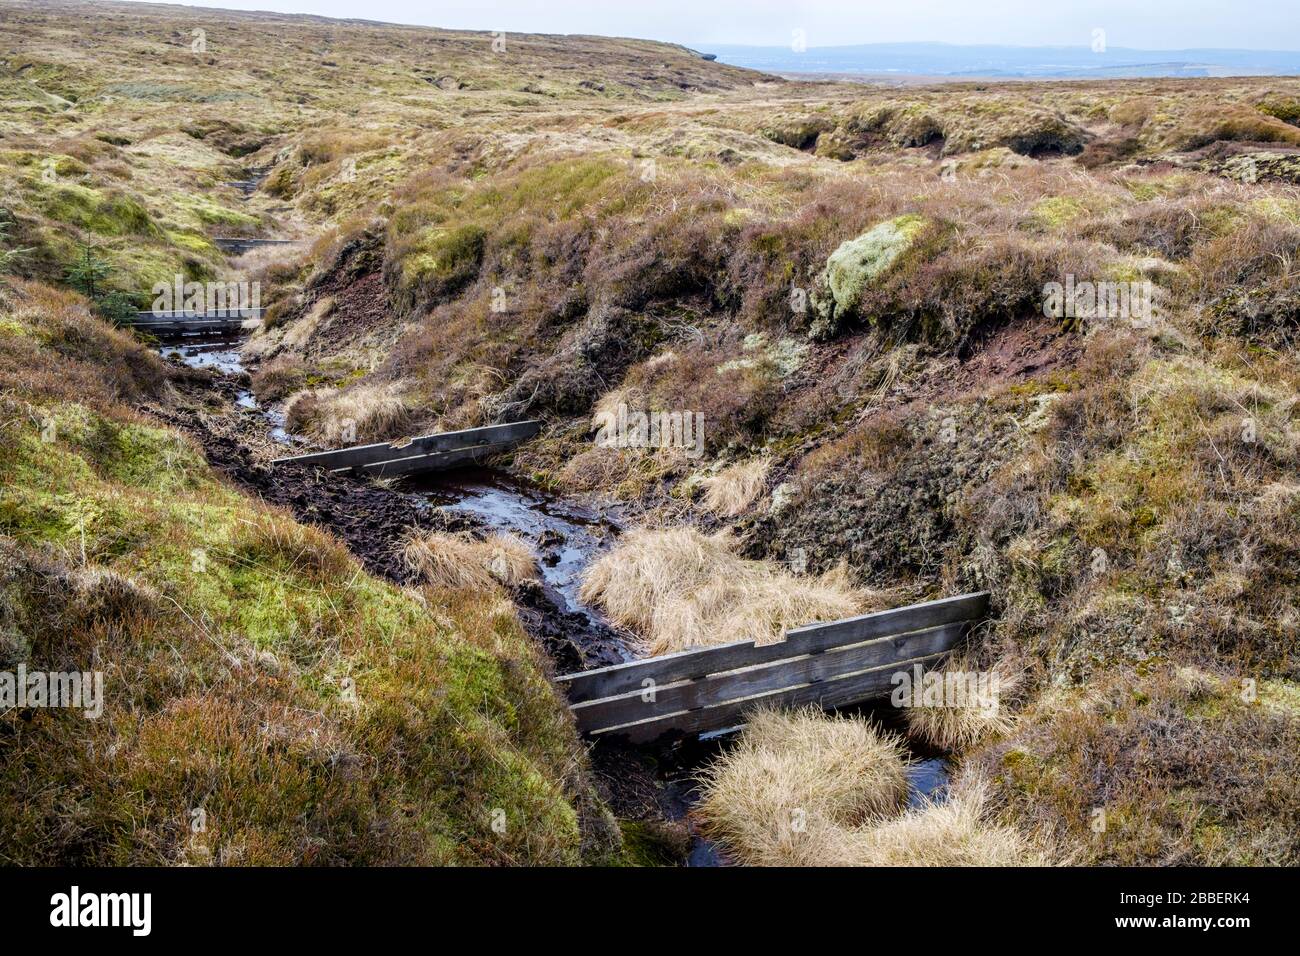 Gully blocking using wooden dams preventing erosion of the moor. Part of the restoration work on Kinder Scout, Derbyshire, Peak District, England, UK Stock Photo